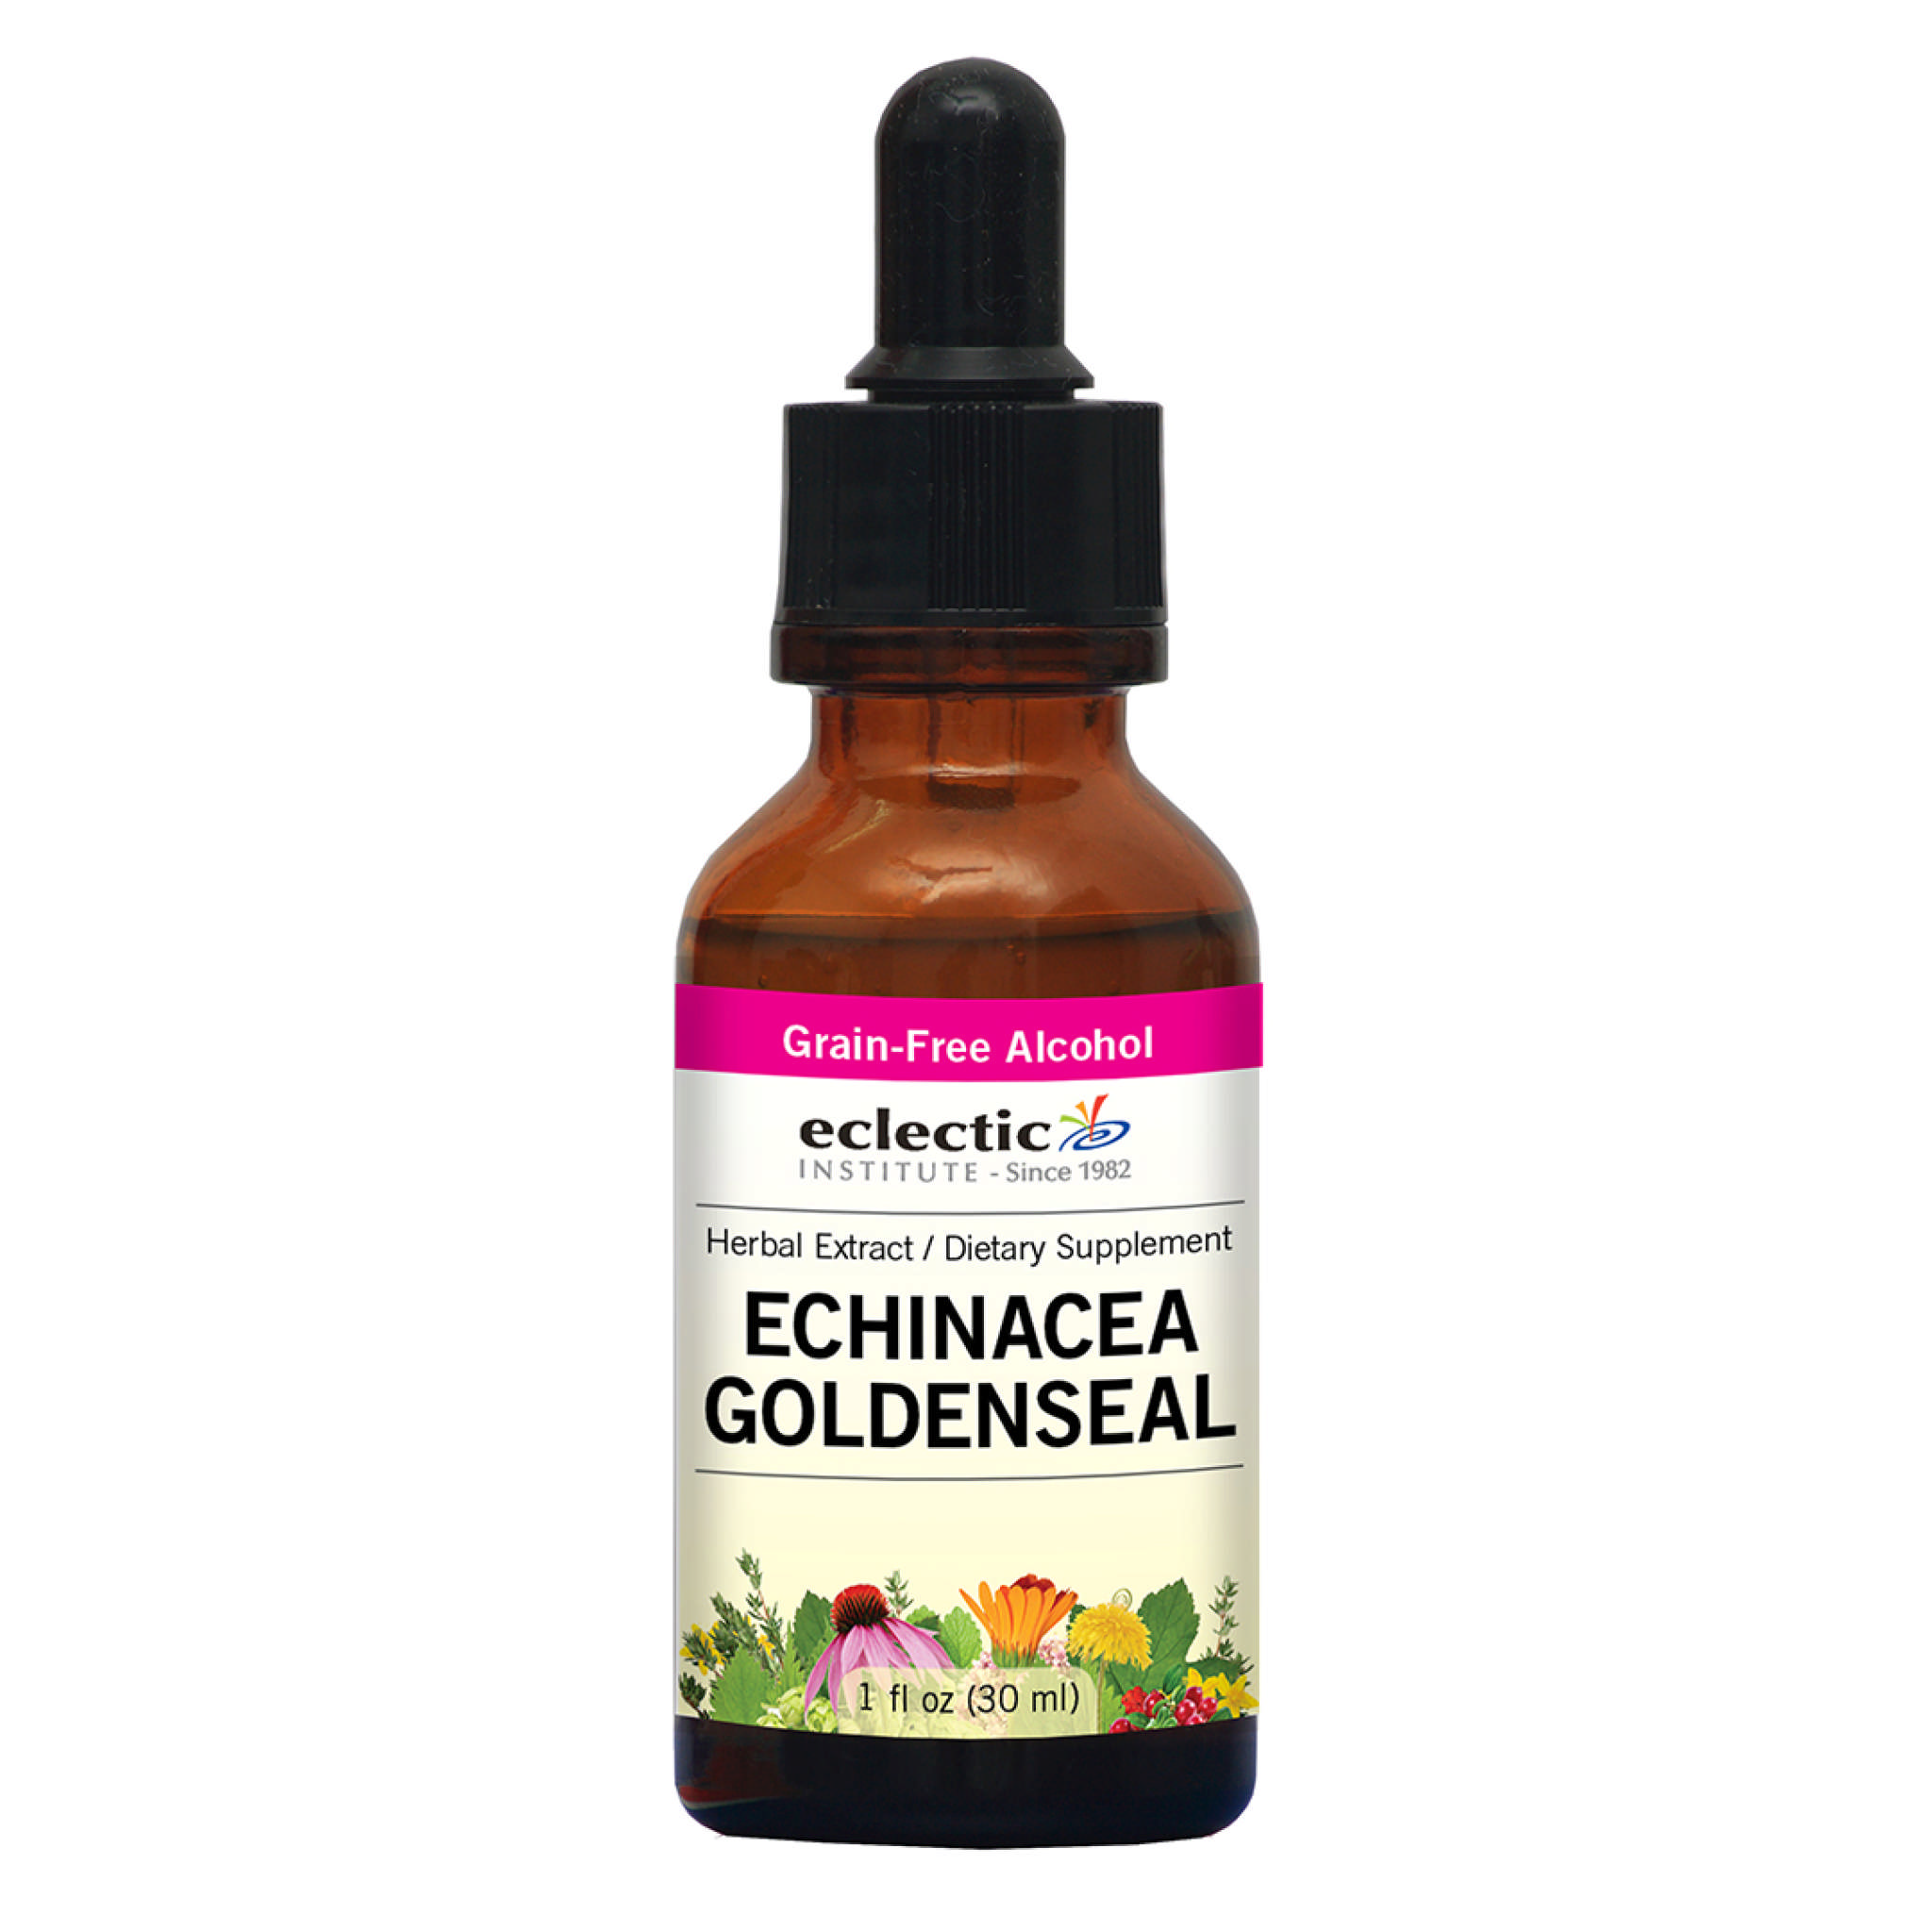 Eclectic Institute - Echin Goldseal Compound Organo